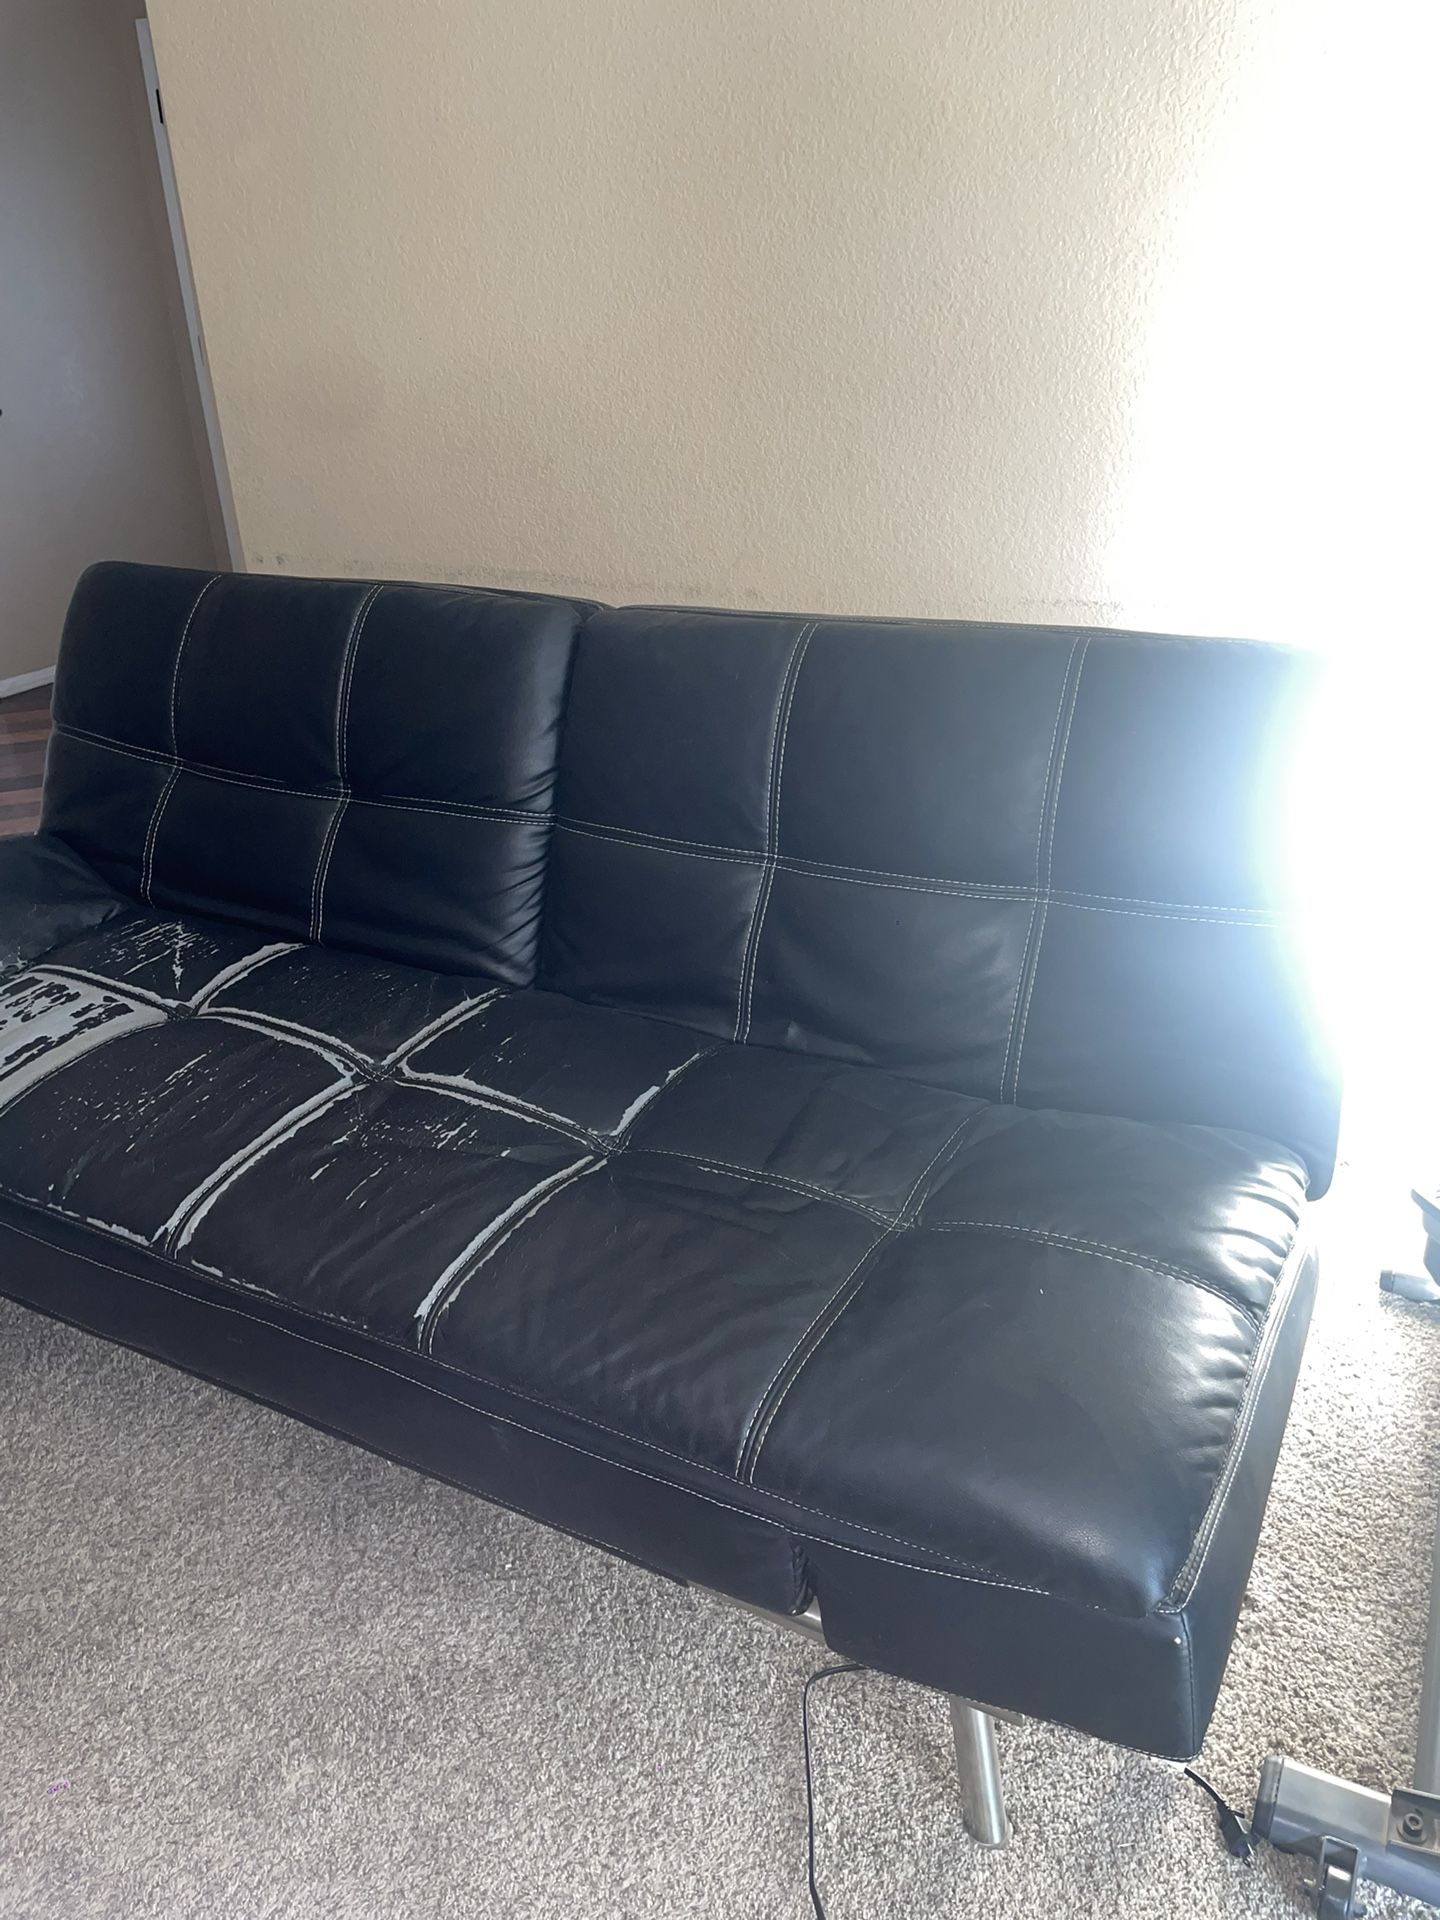 Futon (Convertible couch)